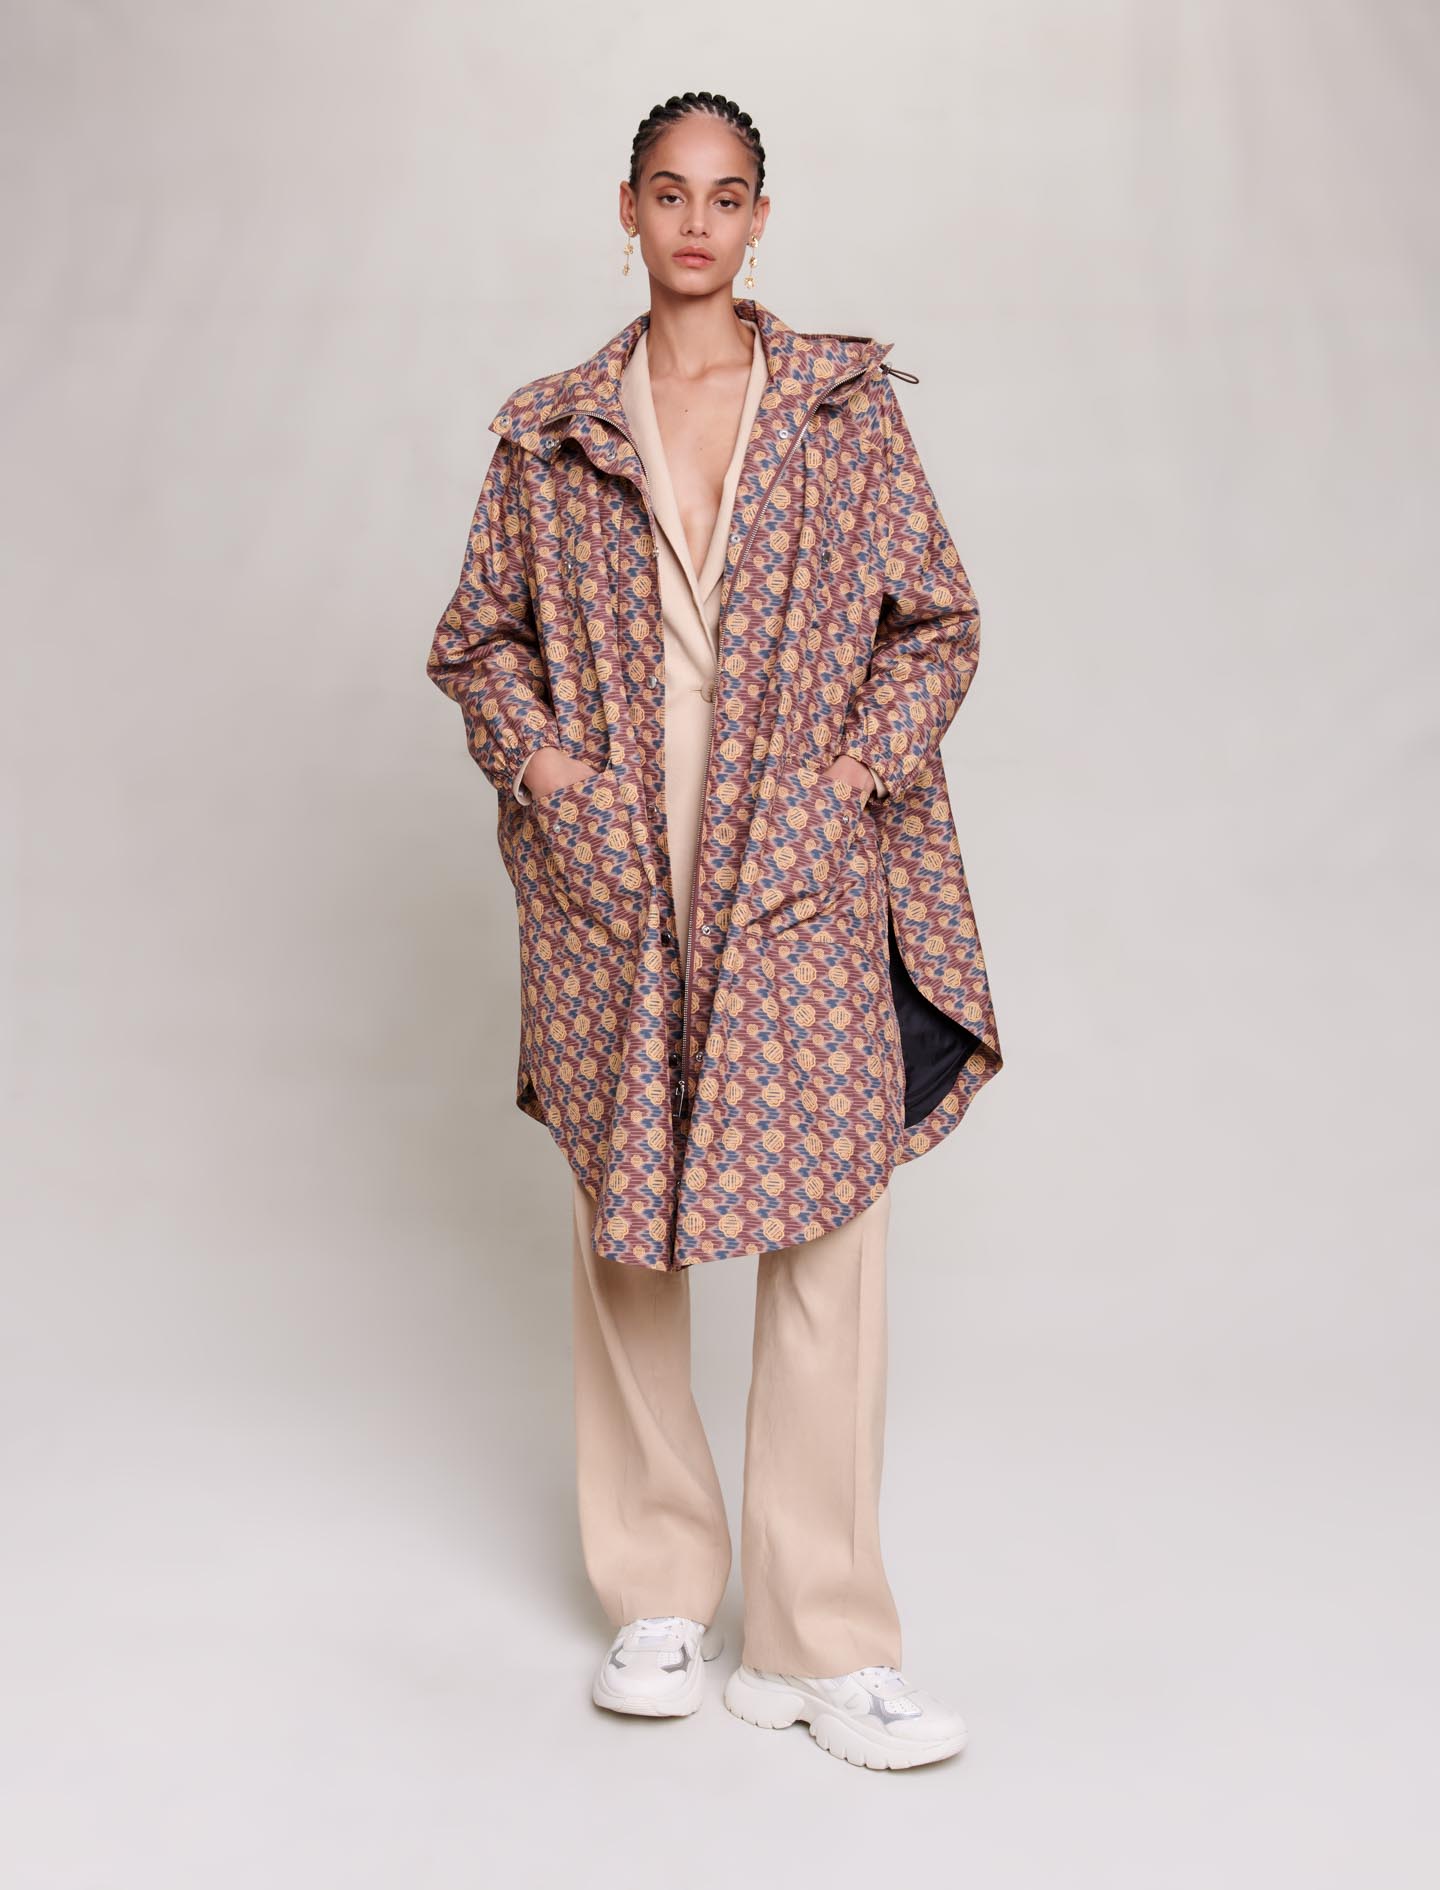 Maje Woman's polyester Lining: Monogram coat for Fall/Winter, in color Brown monogram print /